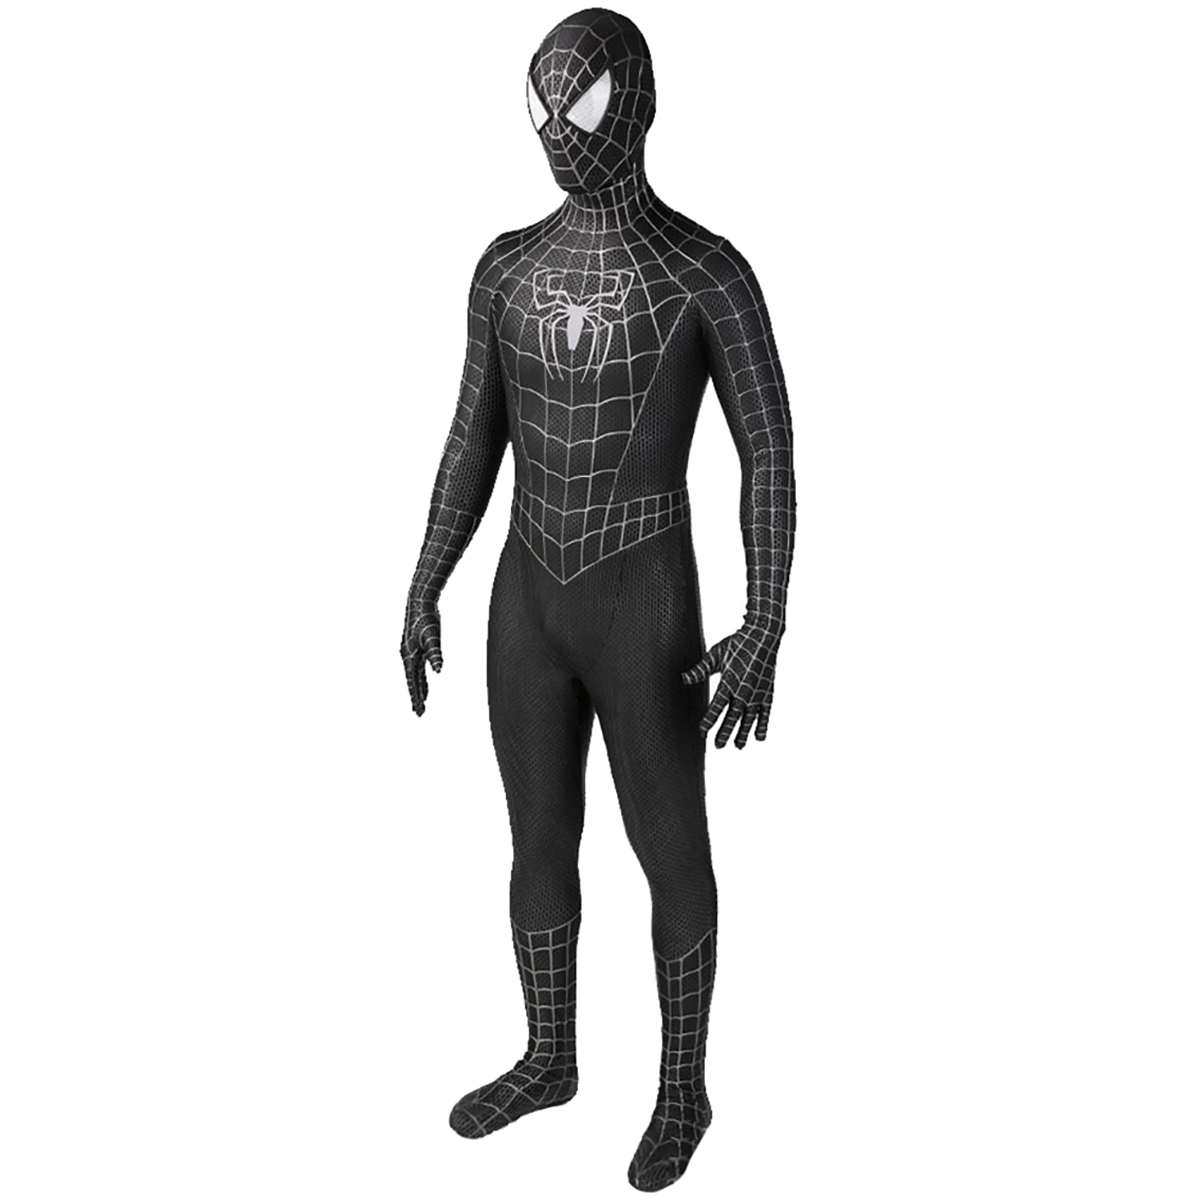 FunPartyCos Introduces a Diverse Range of Spiderman Costumes for Fans of All Ages